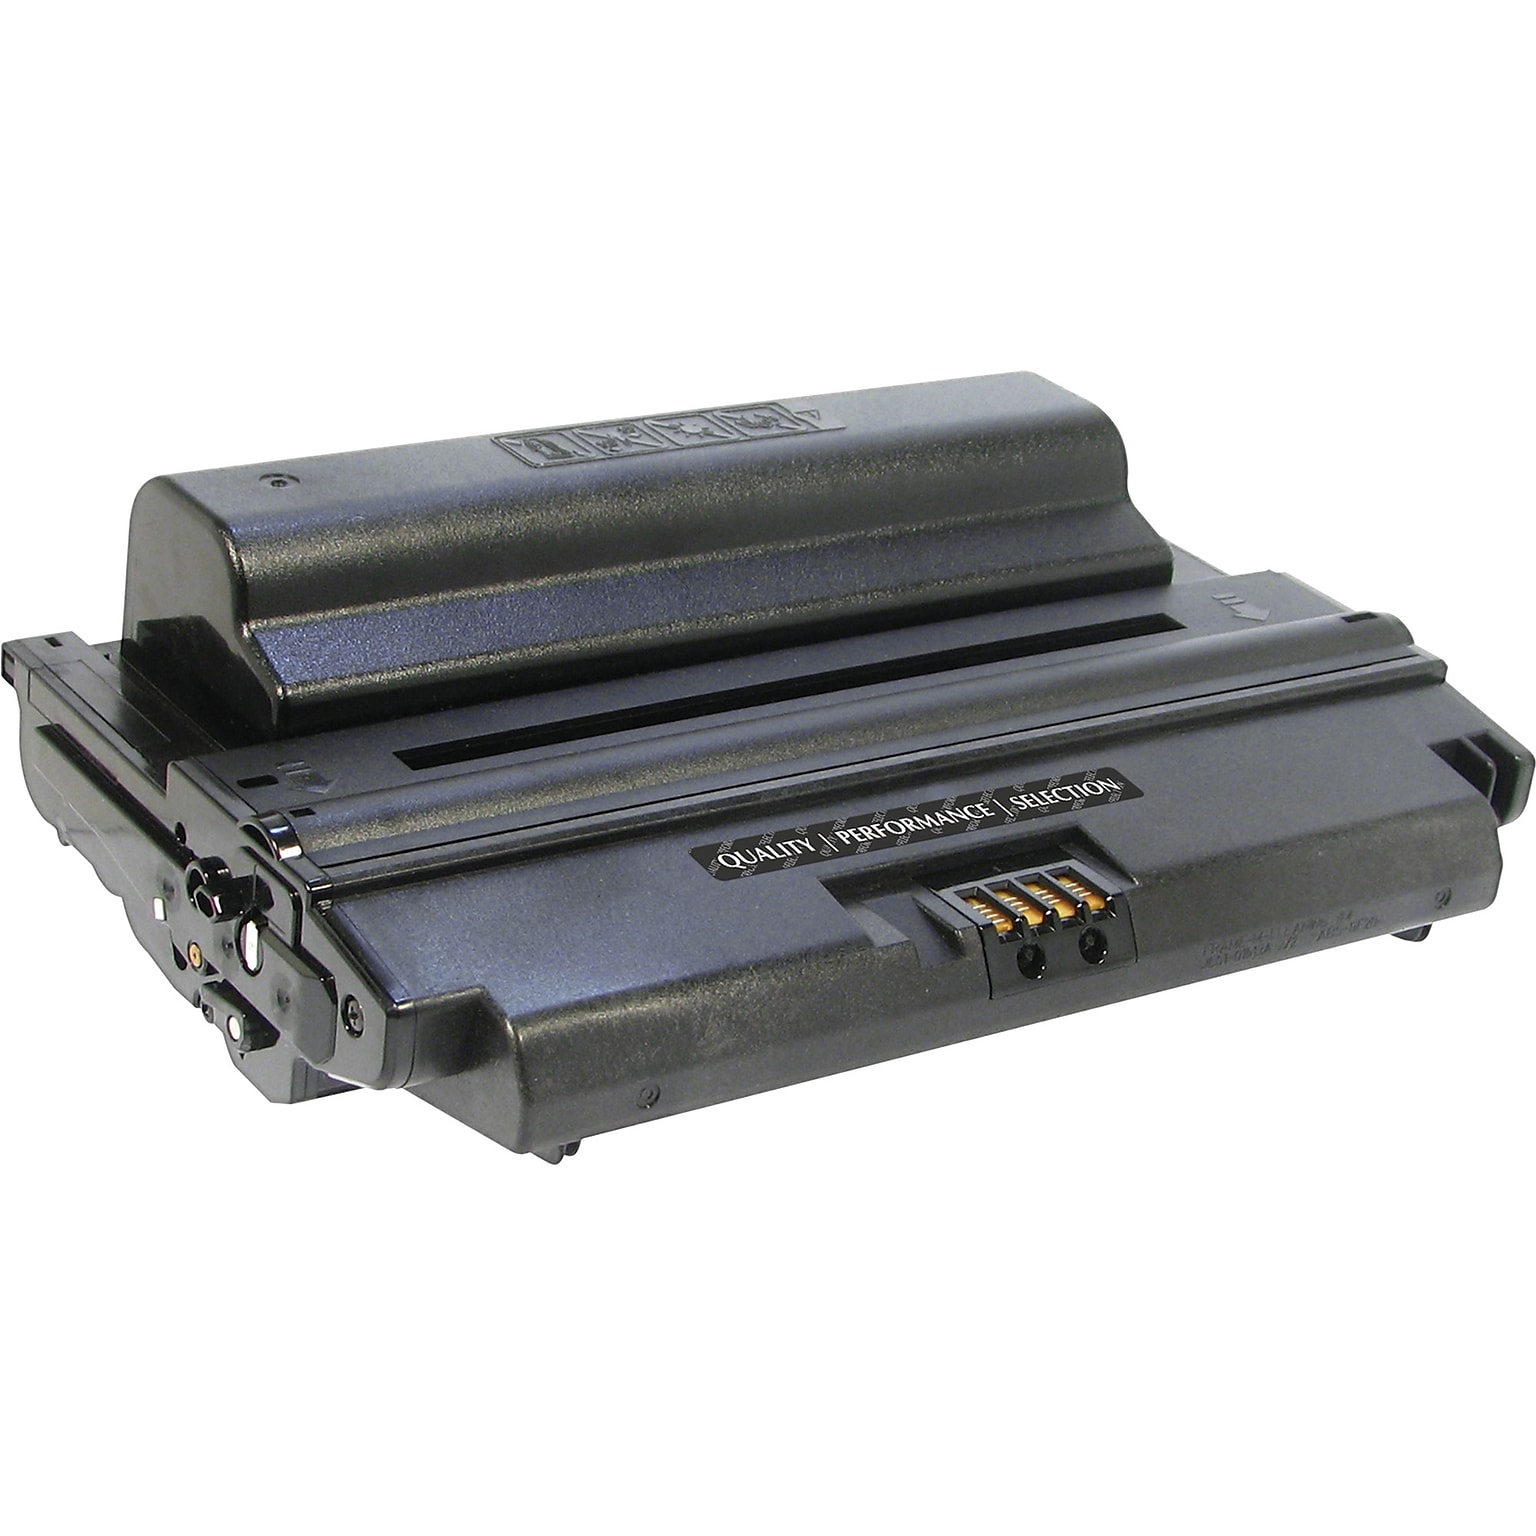 Quill Brand® Black High Yield Toner Cartridge Replacement for Xerox Phaser 3300 (106R01412) (Lifetime Warranty)